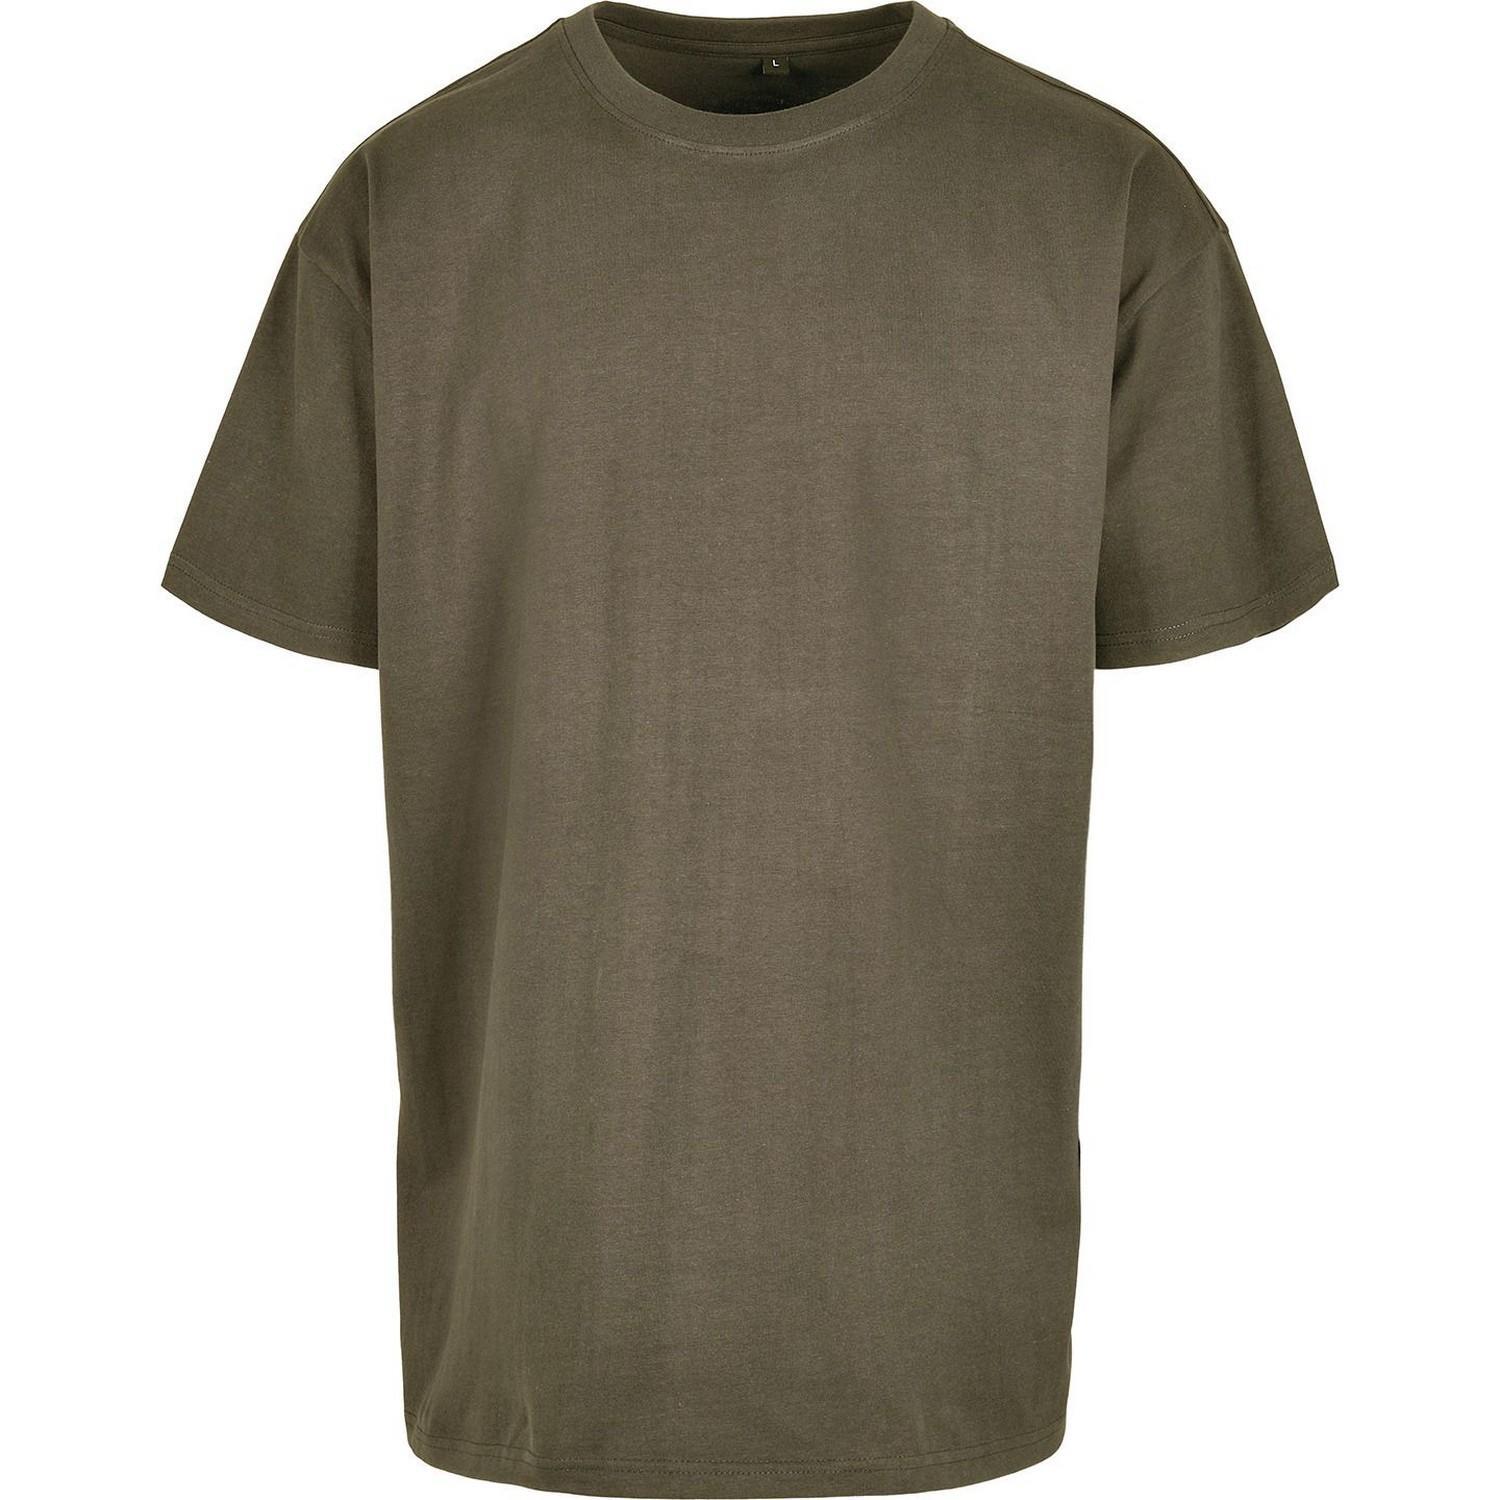 Build Your Brand Unisex Adults Heavy Oversized Tee (Olive) (XS)